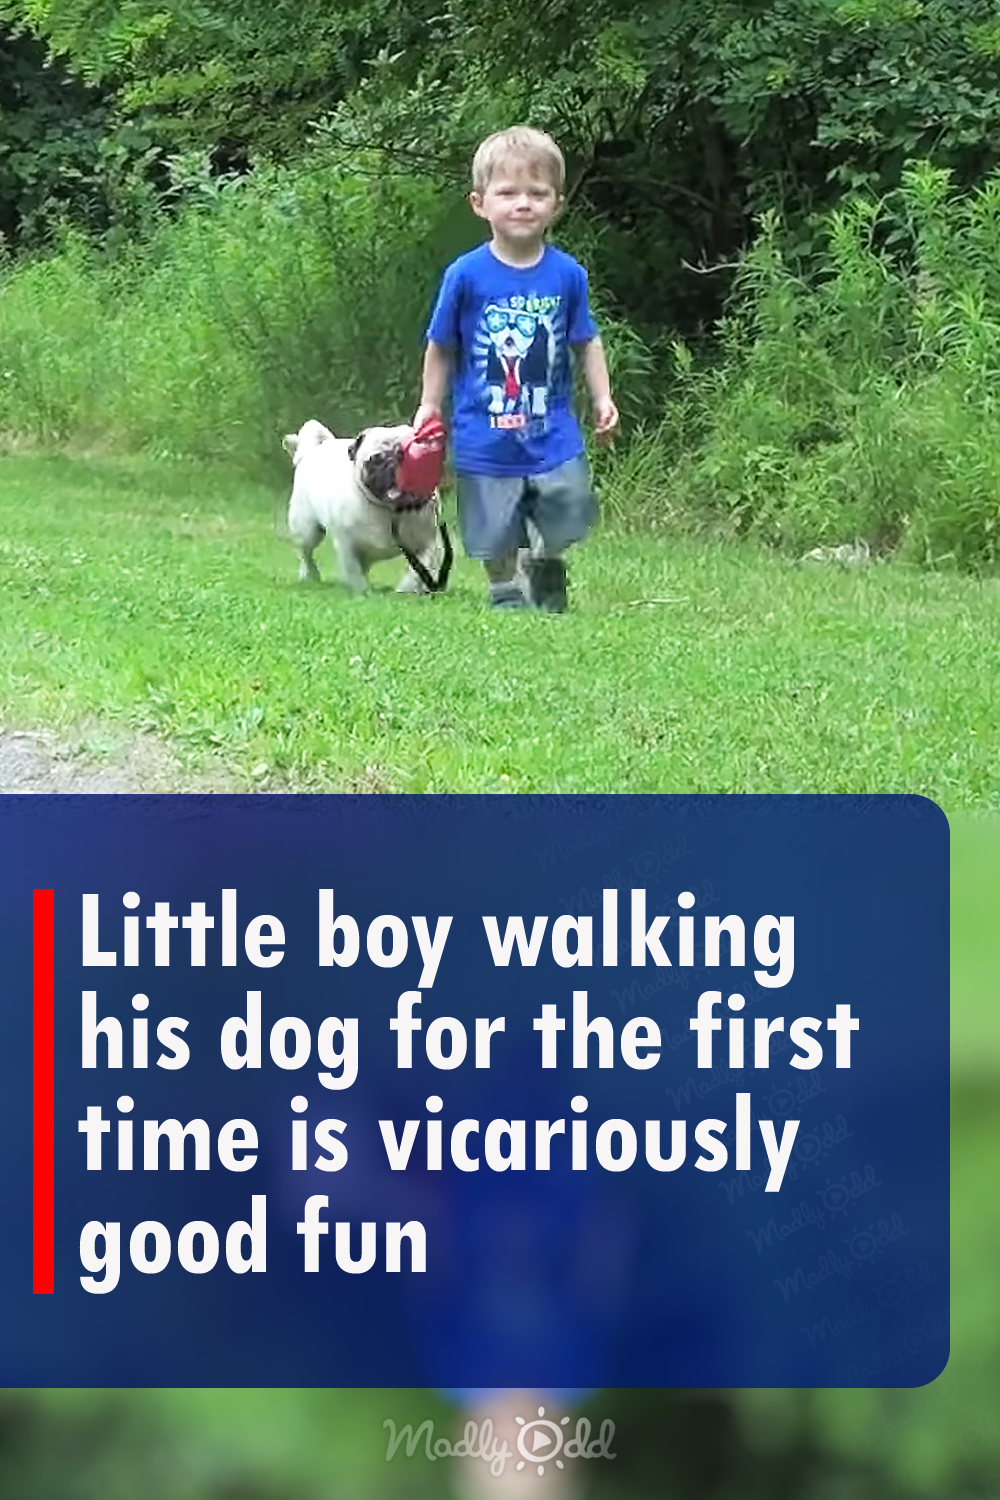 Little boy walking his dog for the first time is vicariously good fun